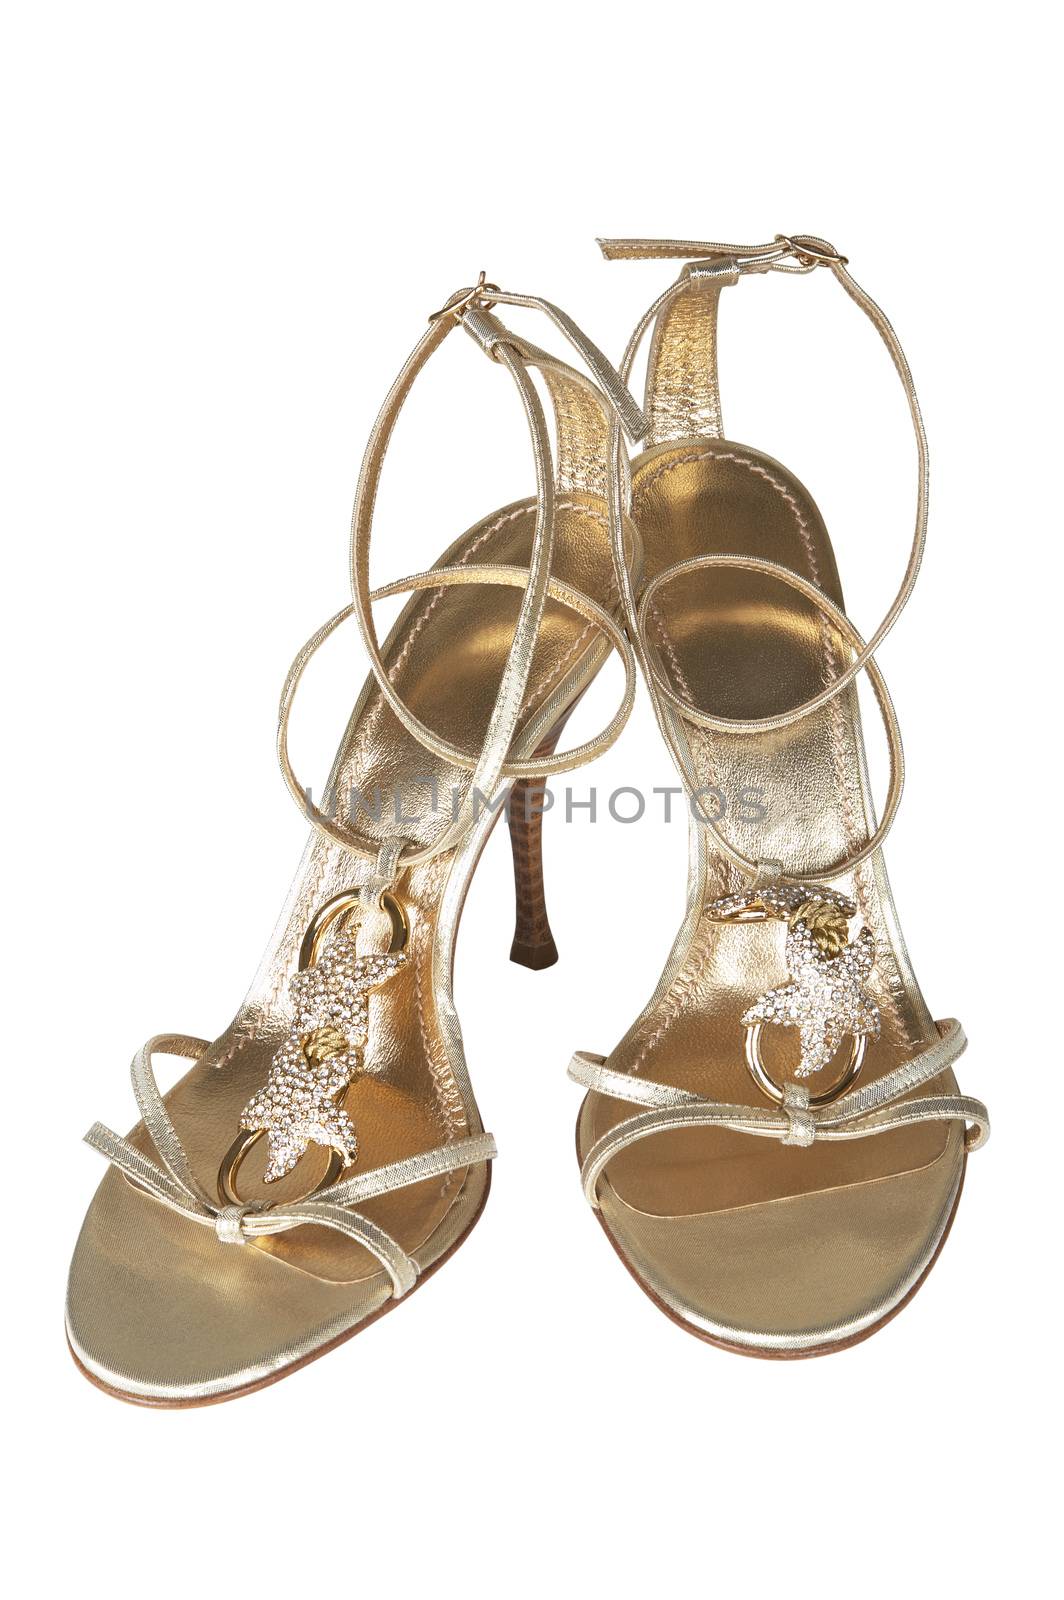 The female open shoes on a white background